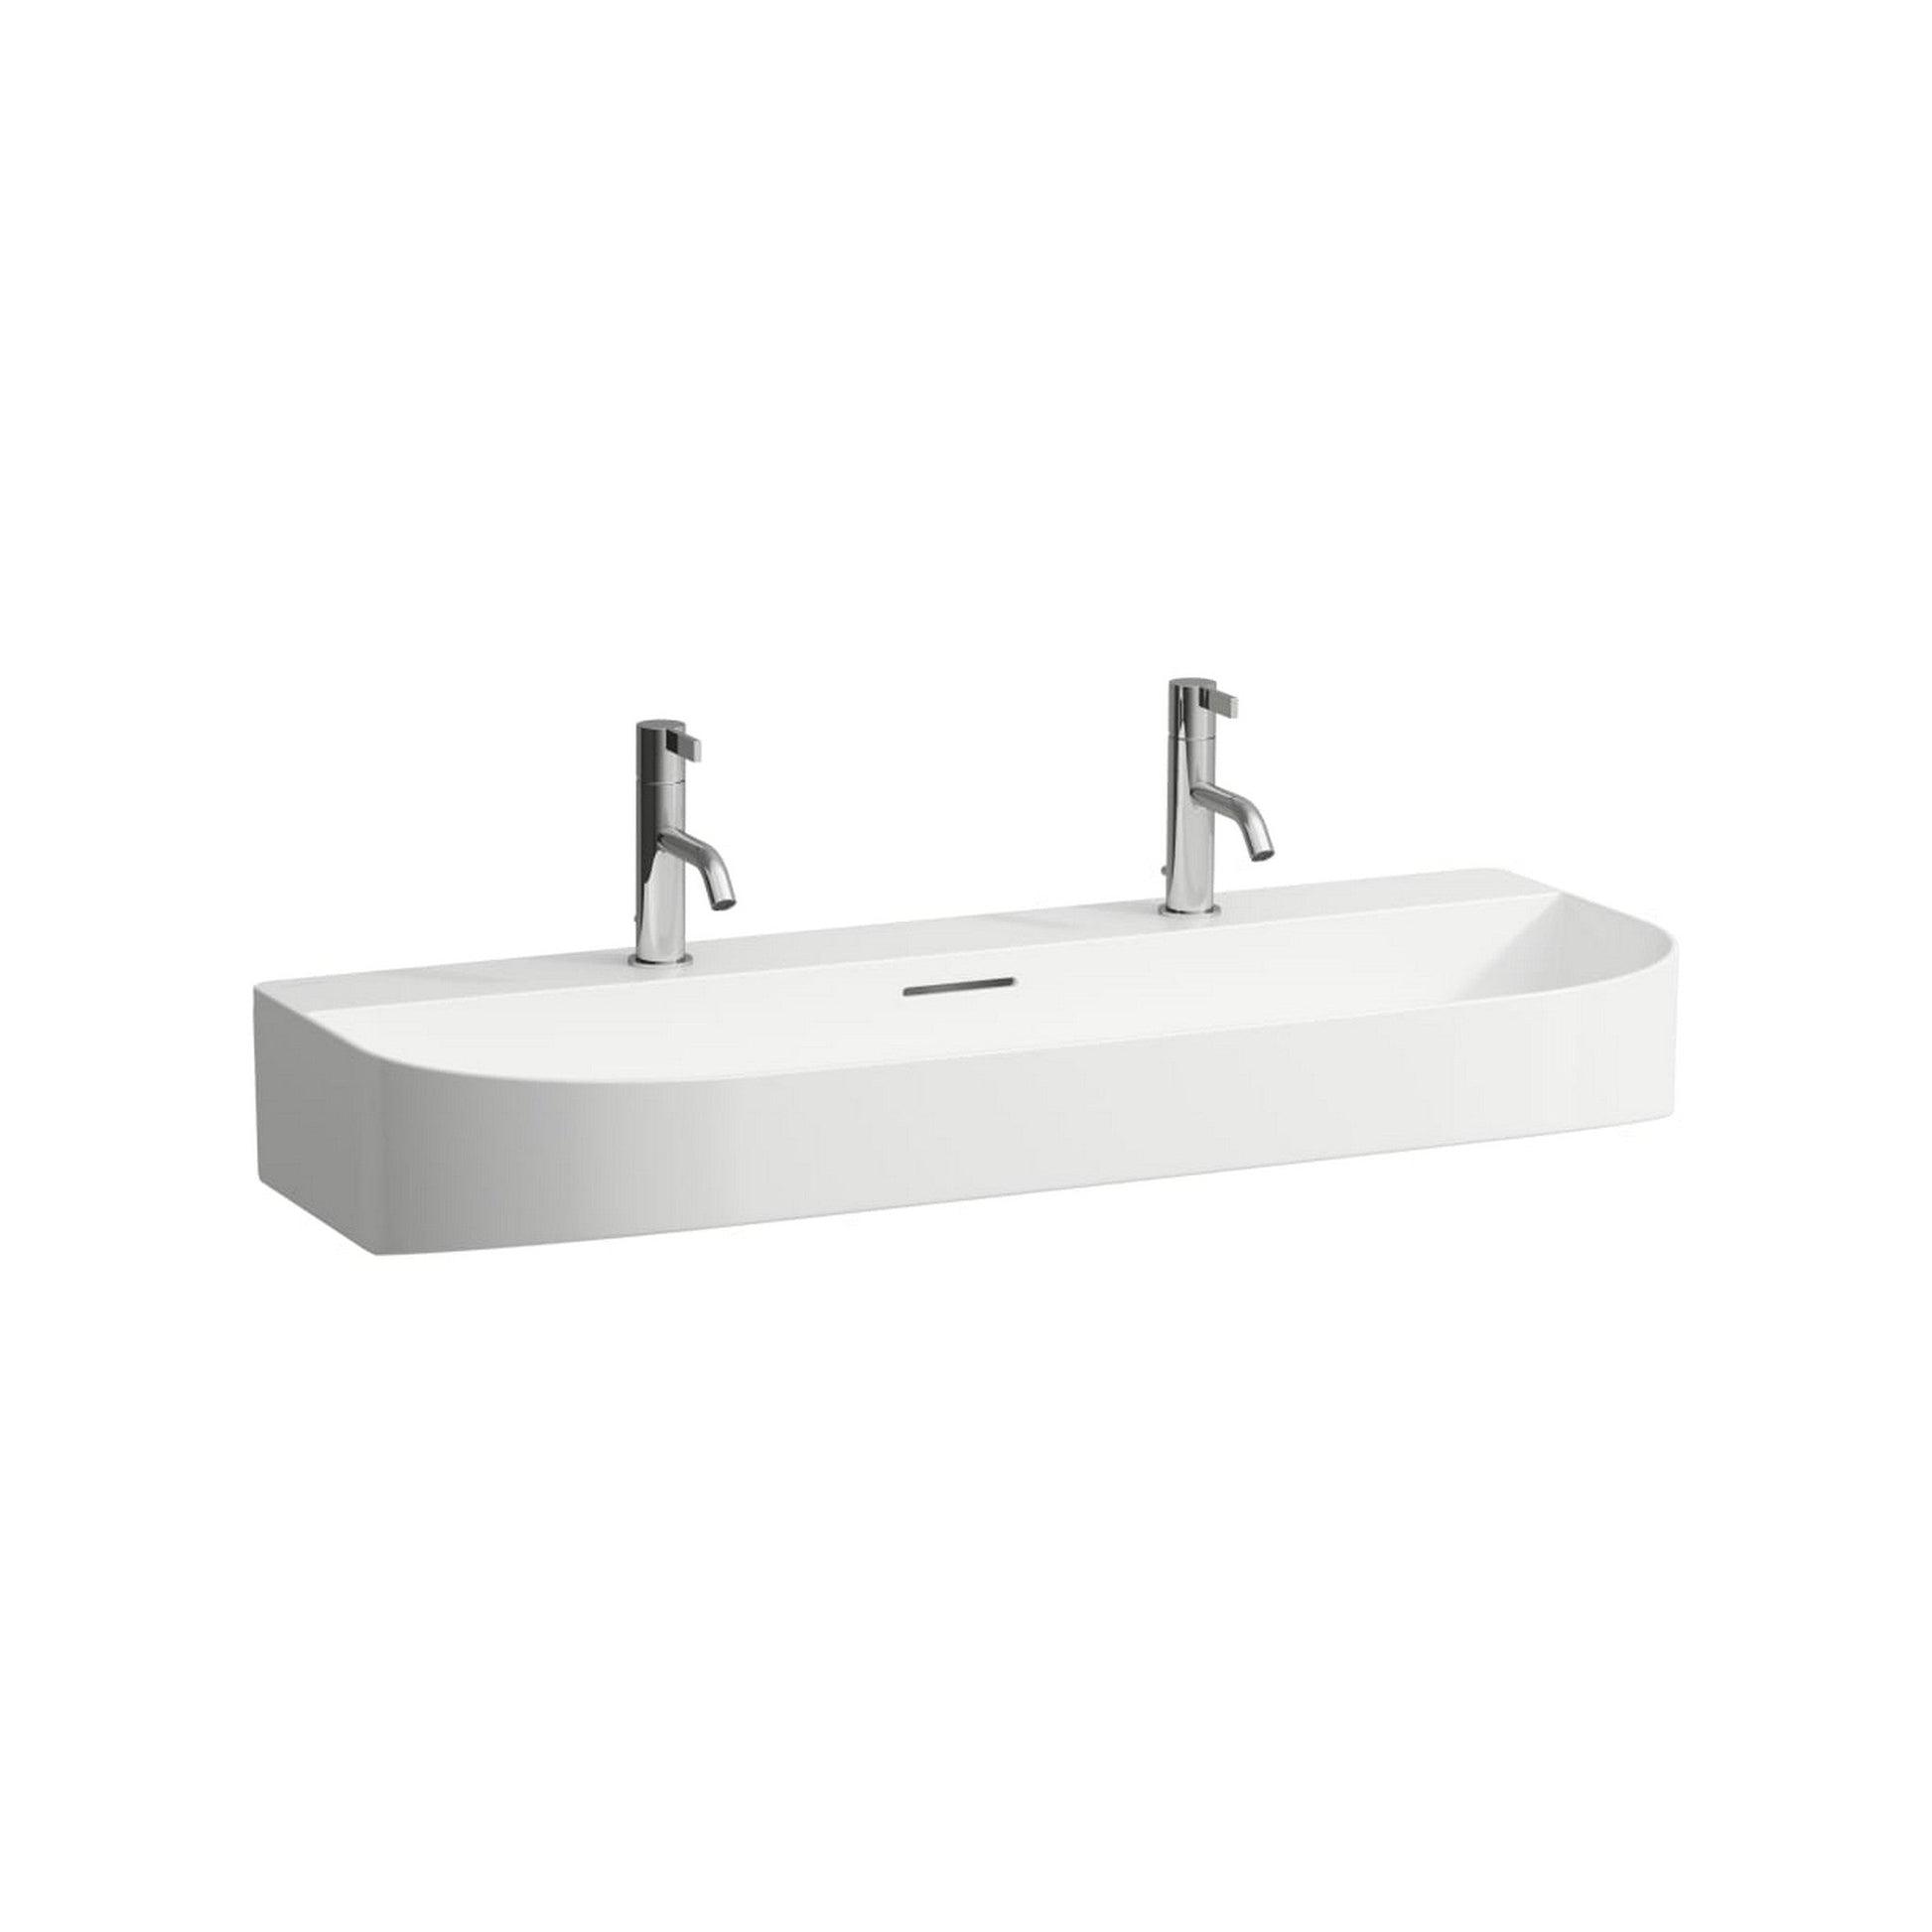 Laufen Sonar 39" White Ceramic Wall-Mounted Bathroom Sink With 2 Faucet Holes